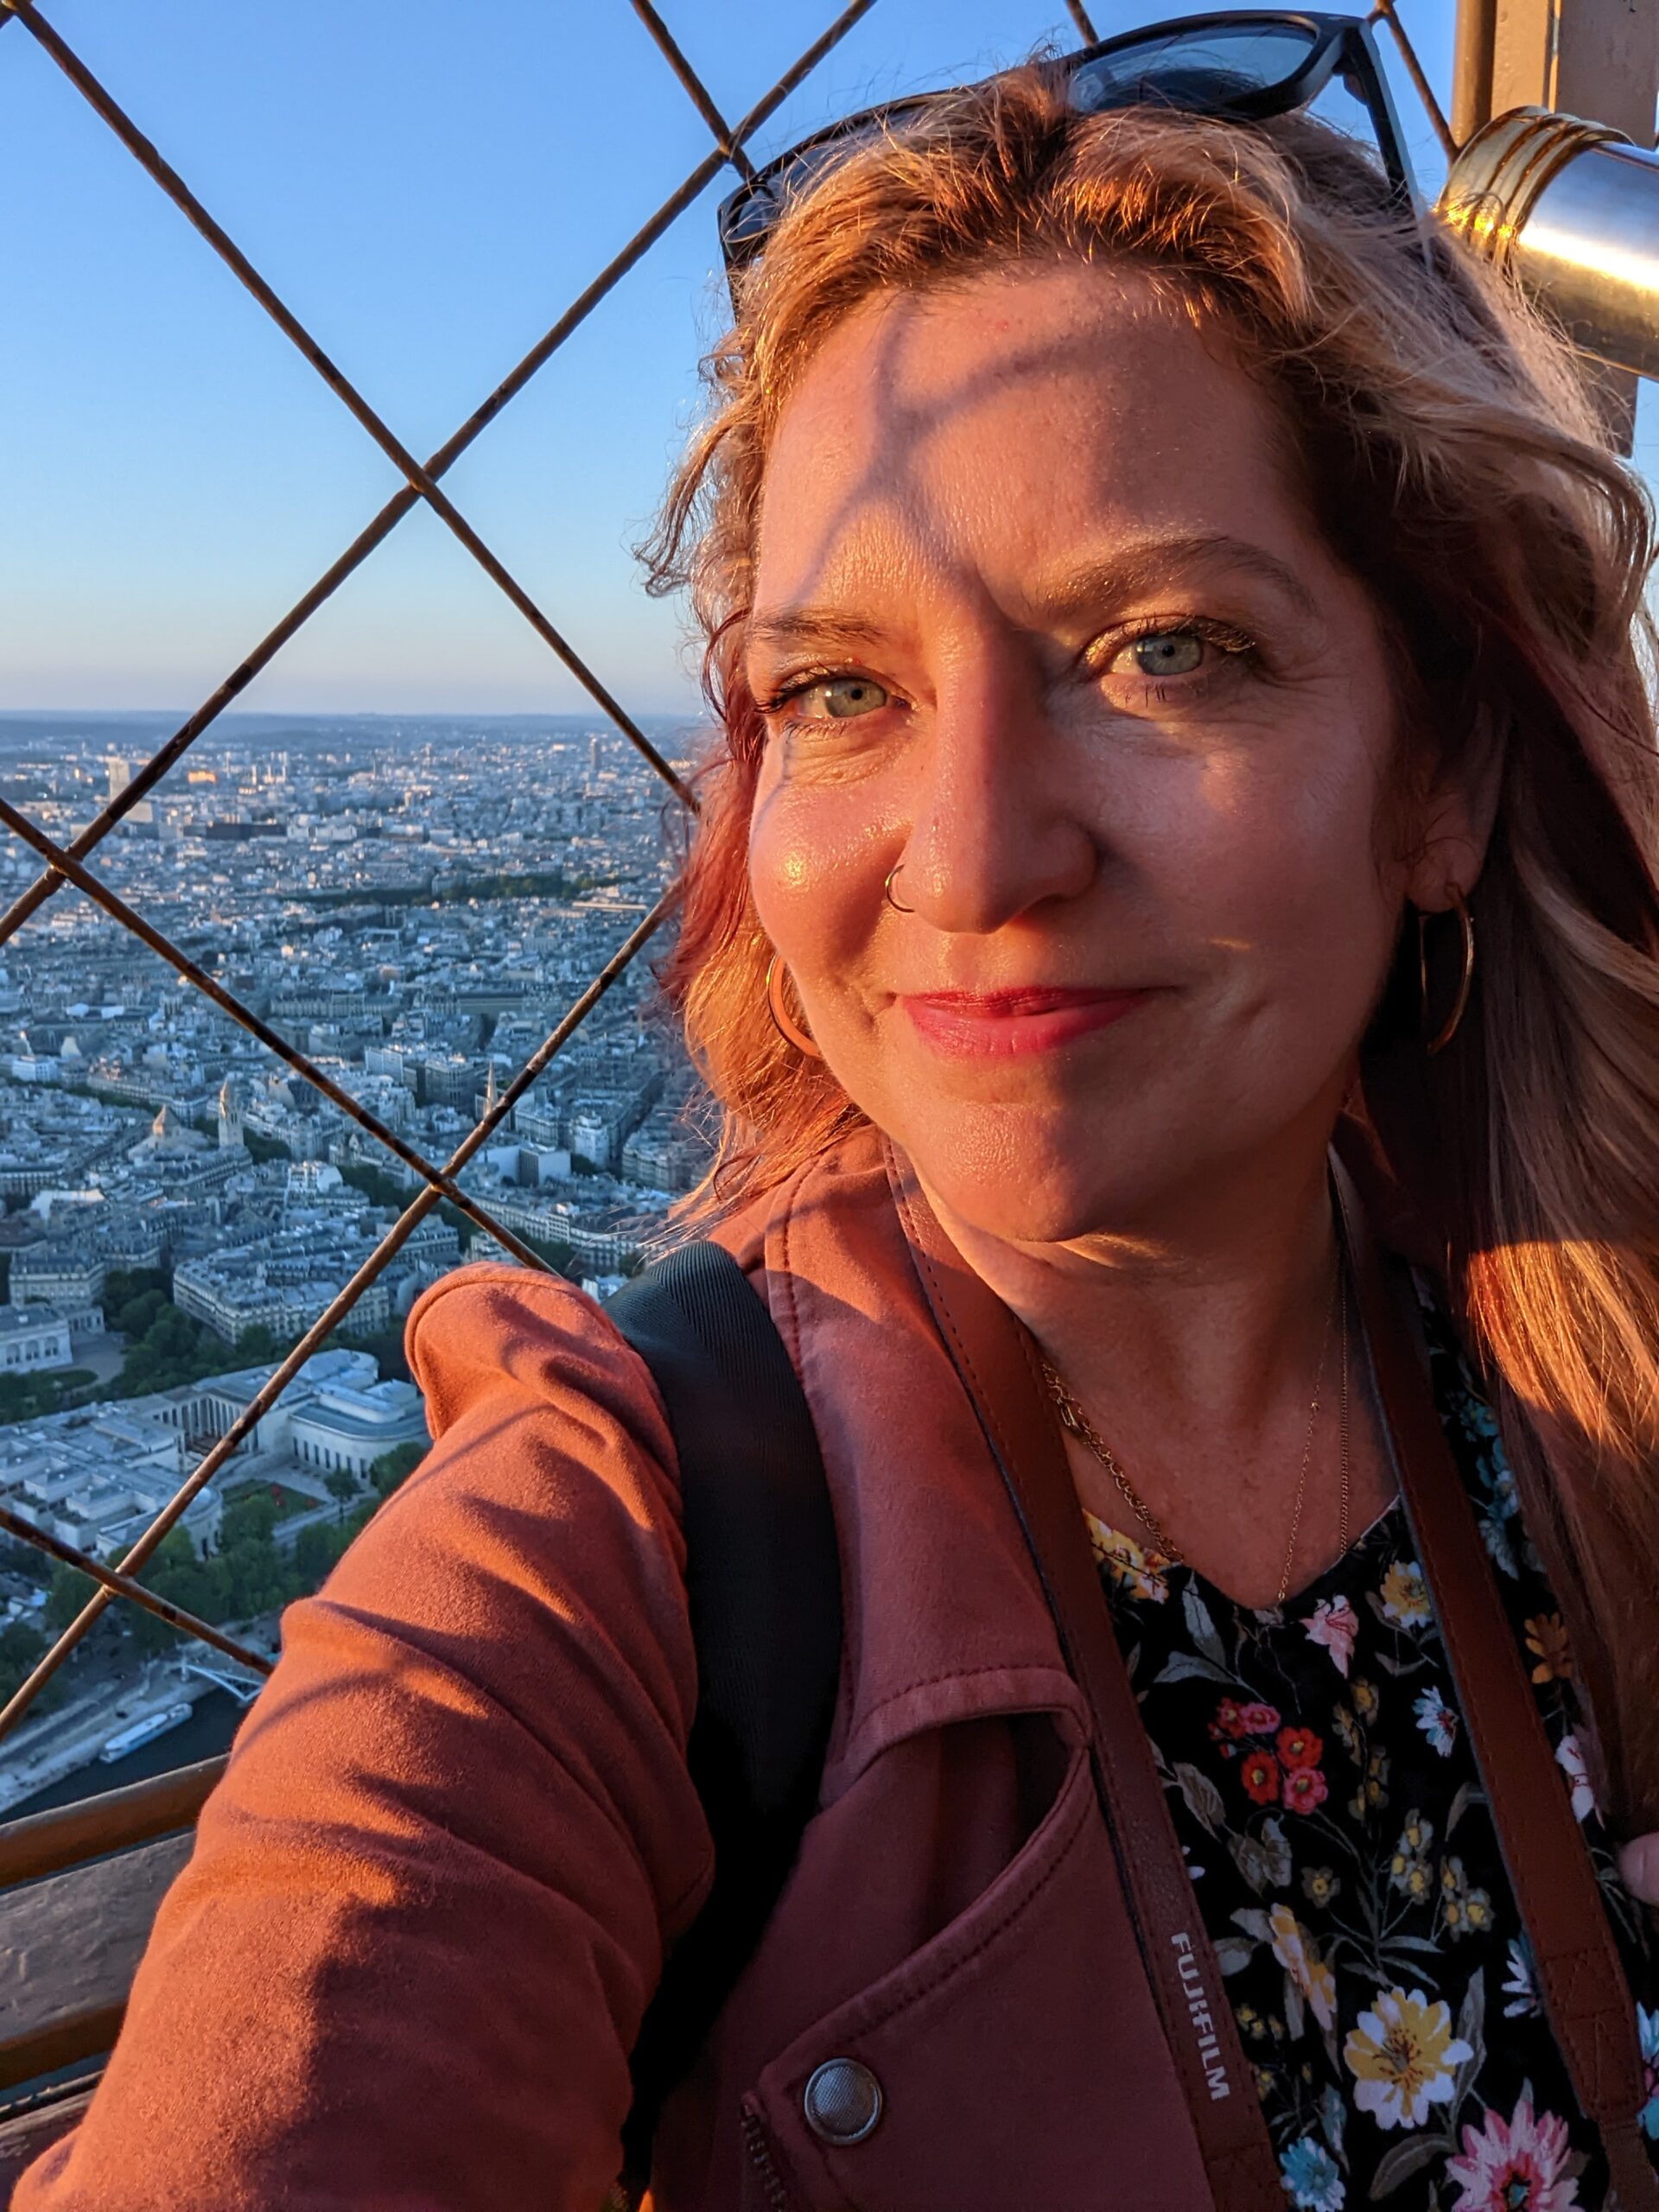 Solo in Paris, top of the Eiffel Tower